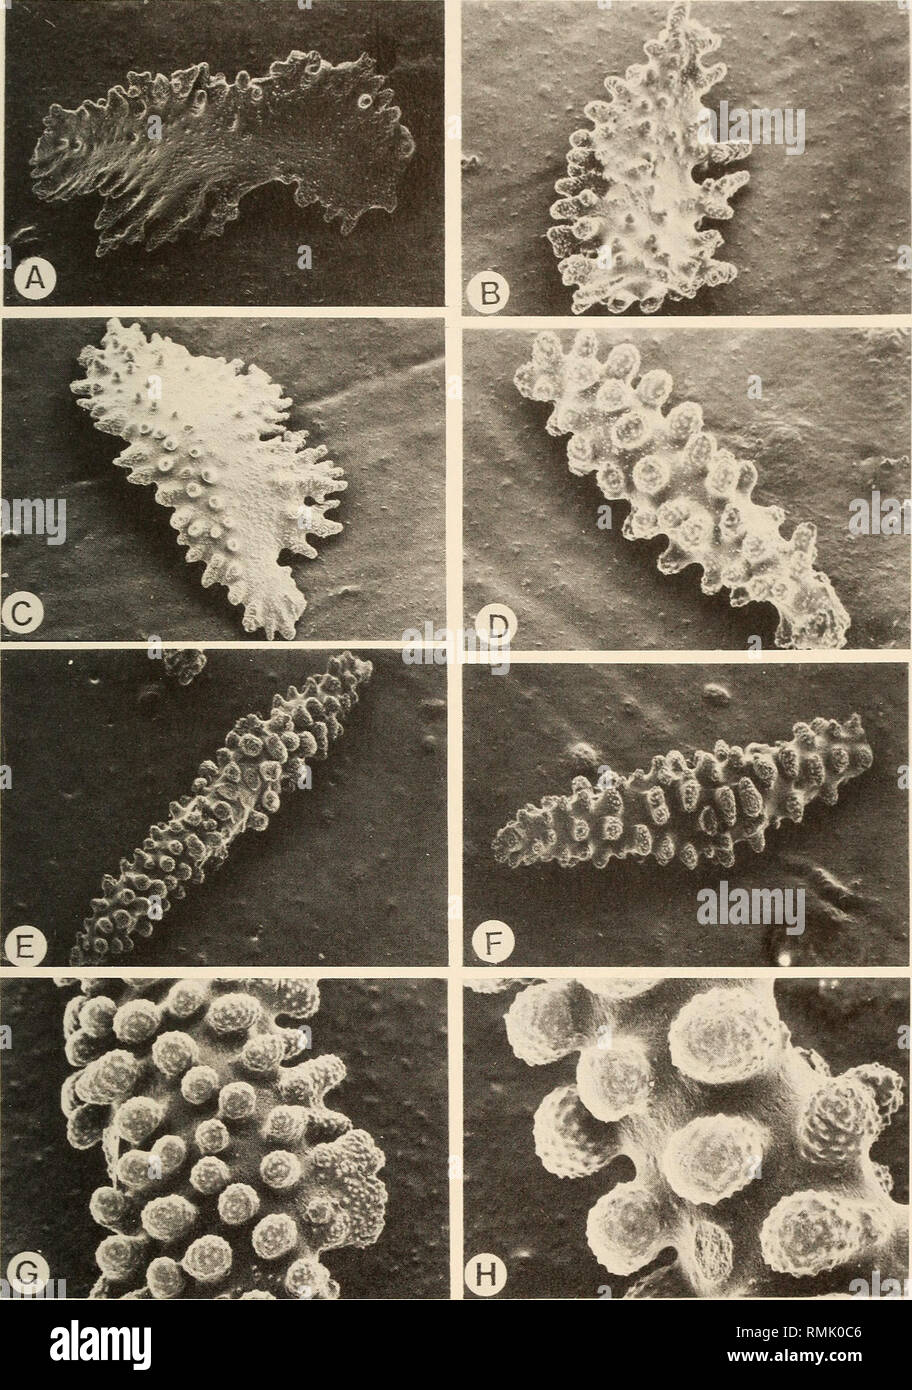 . Annals of the South African Museum = Annale van die Suid-Afrikaanse Museum. Natural history. GORGONIAN OCTOCORALS OF SOUTHERN AFRICA 267. Fig. 61. Scanning electron micrographs. Simpsonella squamifera (Kiikenthal, 1919); sclerites. A-C. Sclerites from the polyp wall. A. 0,22 mm. B. 0,12 mm. C. 0,175 mm. D-F. Coenen- chymal sclerites. D. 0,10 mm. E. 0,35 mm. F. 0,20 mm. G. Detail of a polyp wall sclerite; length of portion shown 0,06 mm. H. Detail of a coenenchyme sclerite; length of portion shown 0,04 mm.. Please note that these images are extracted from scanned page images that may have bee Stock Photo